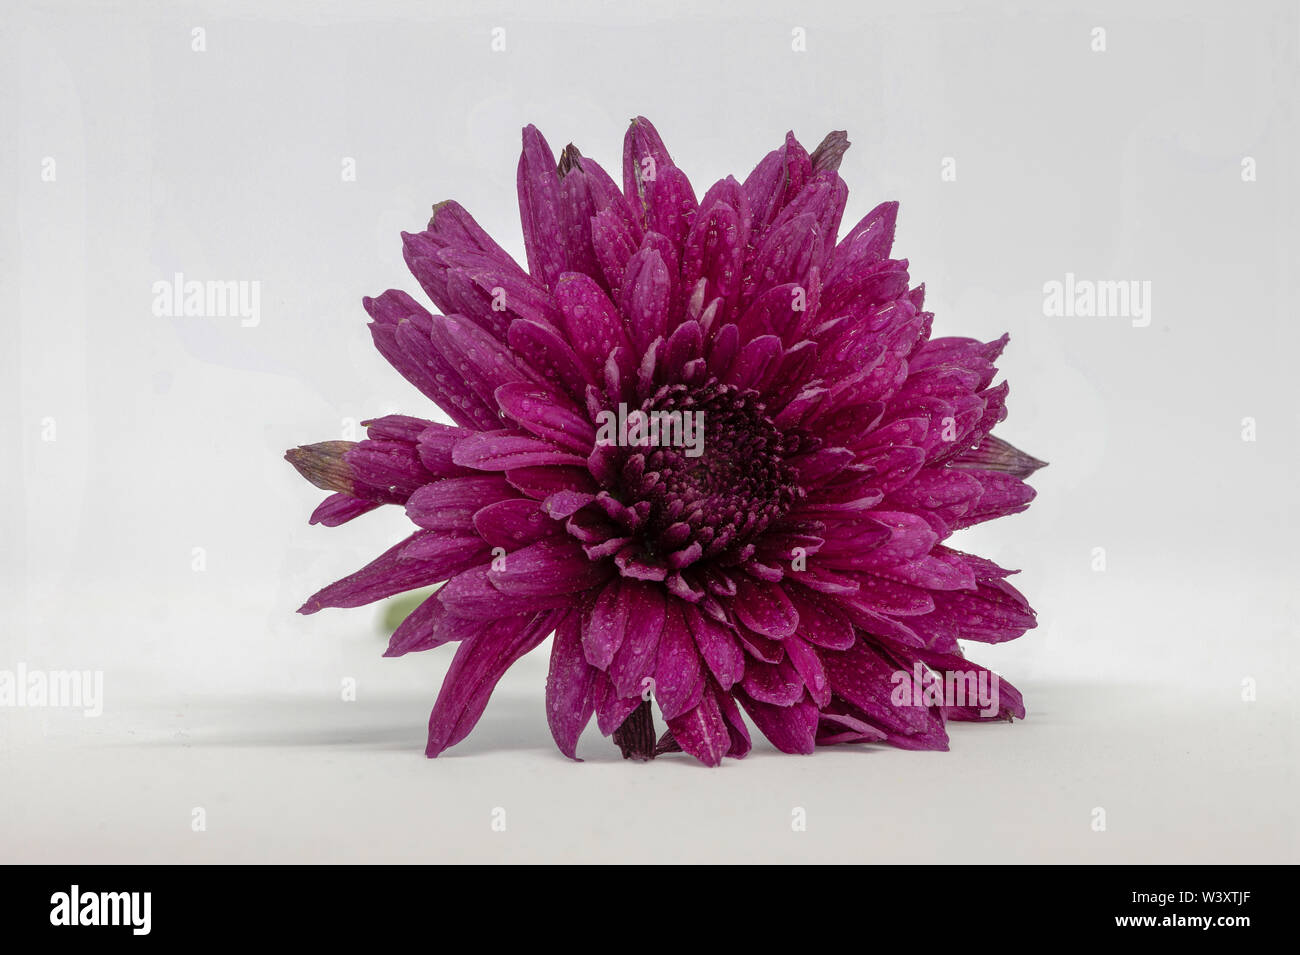 Focus Stacked Chrysanthemum flower isolated on a white background Stock Photo